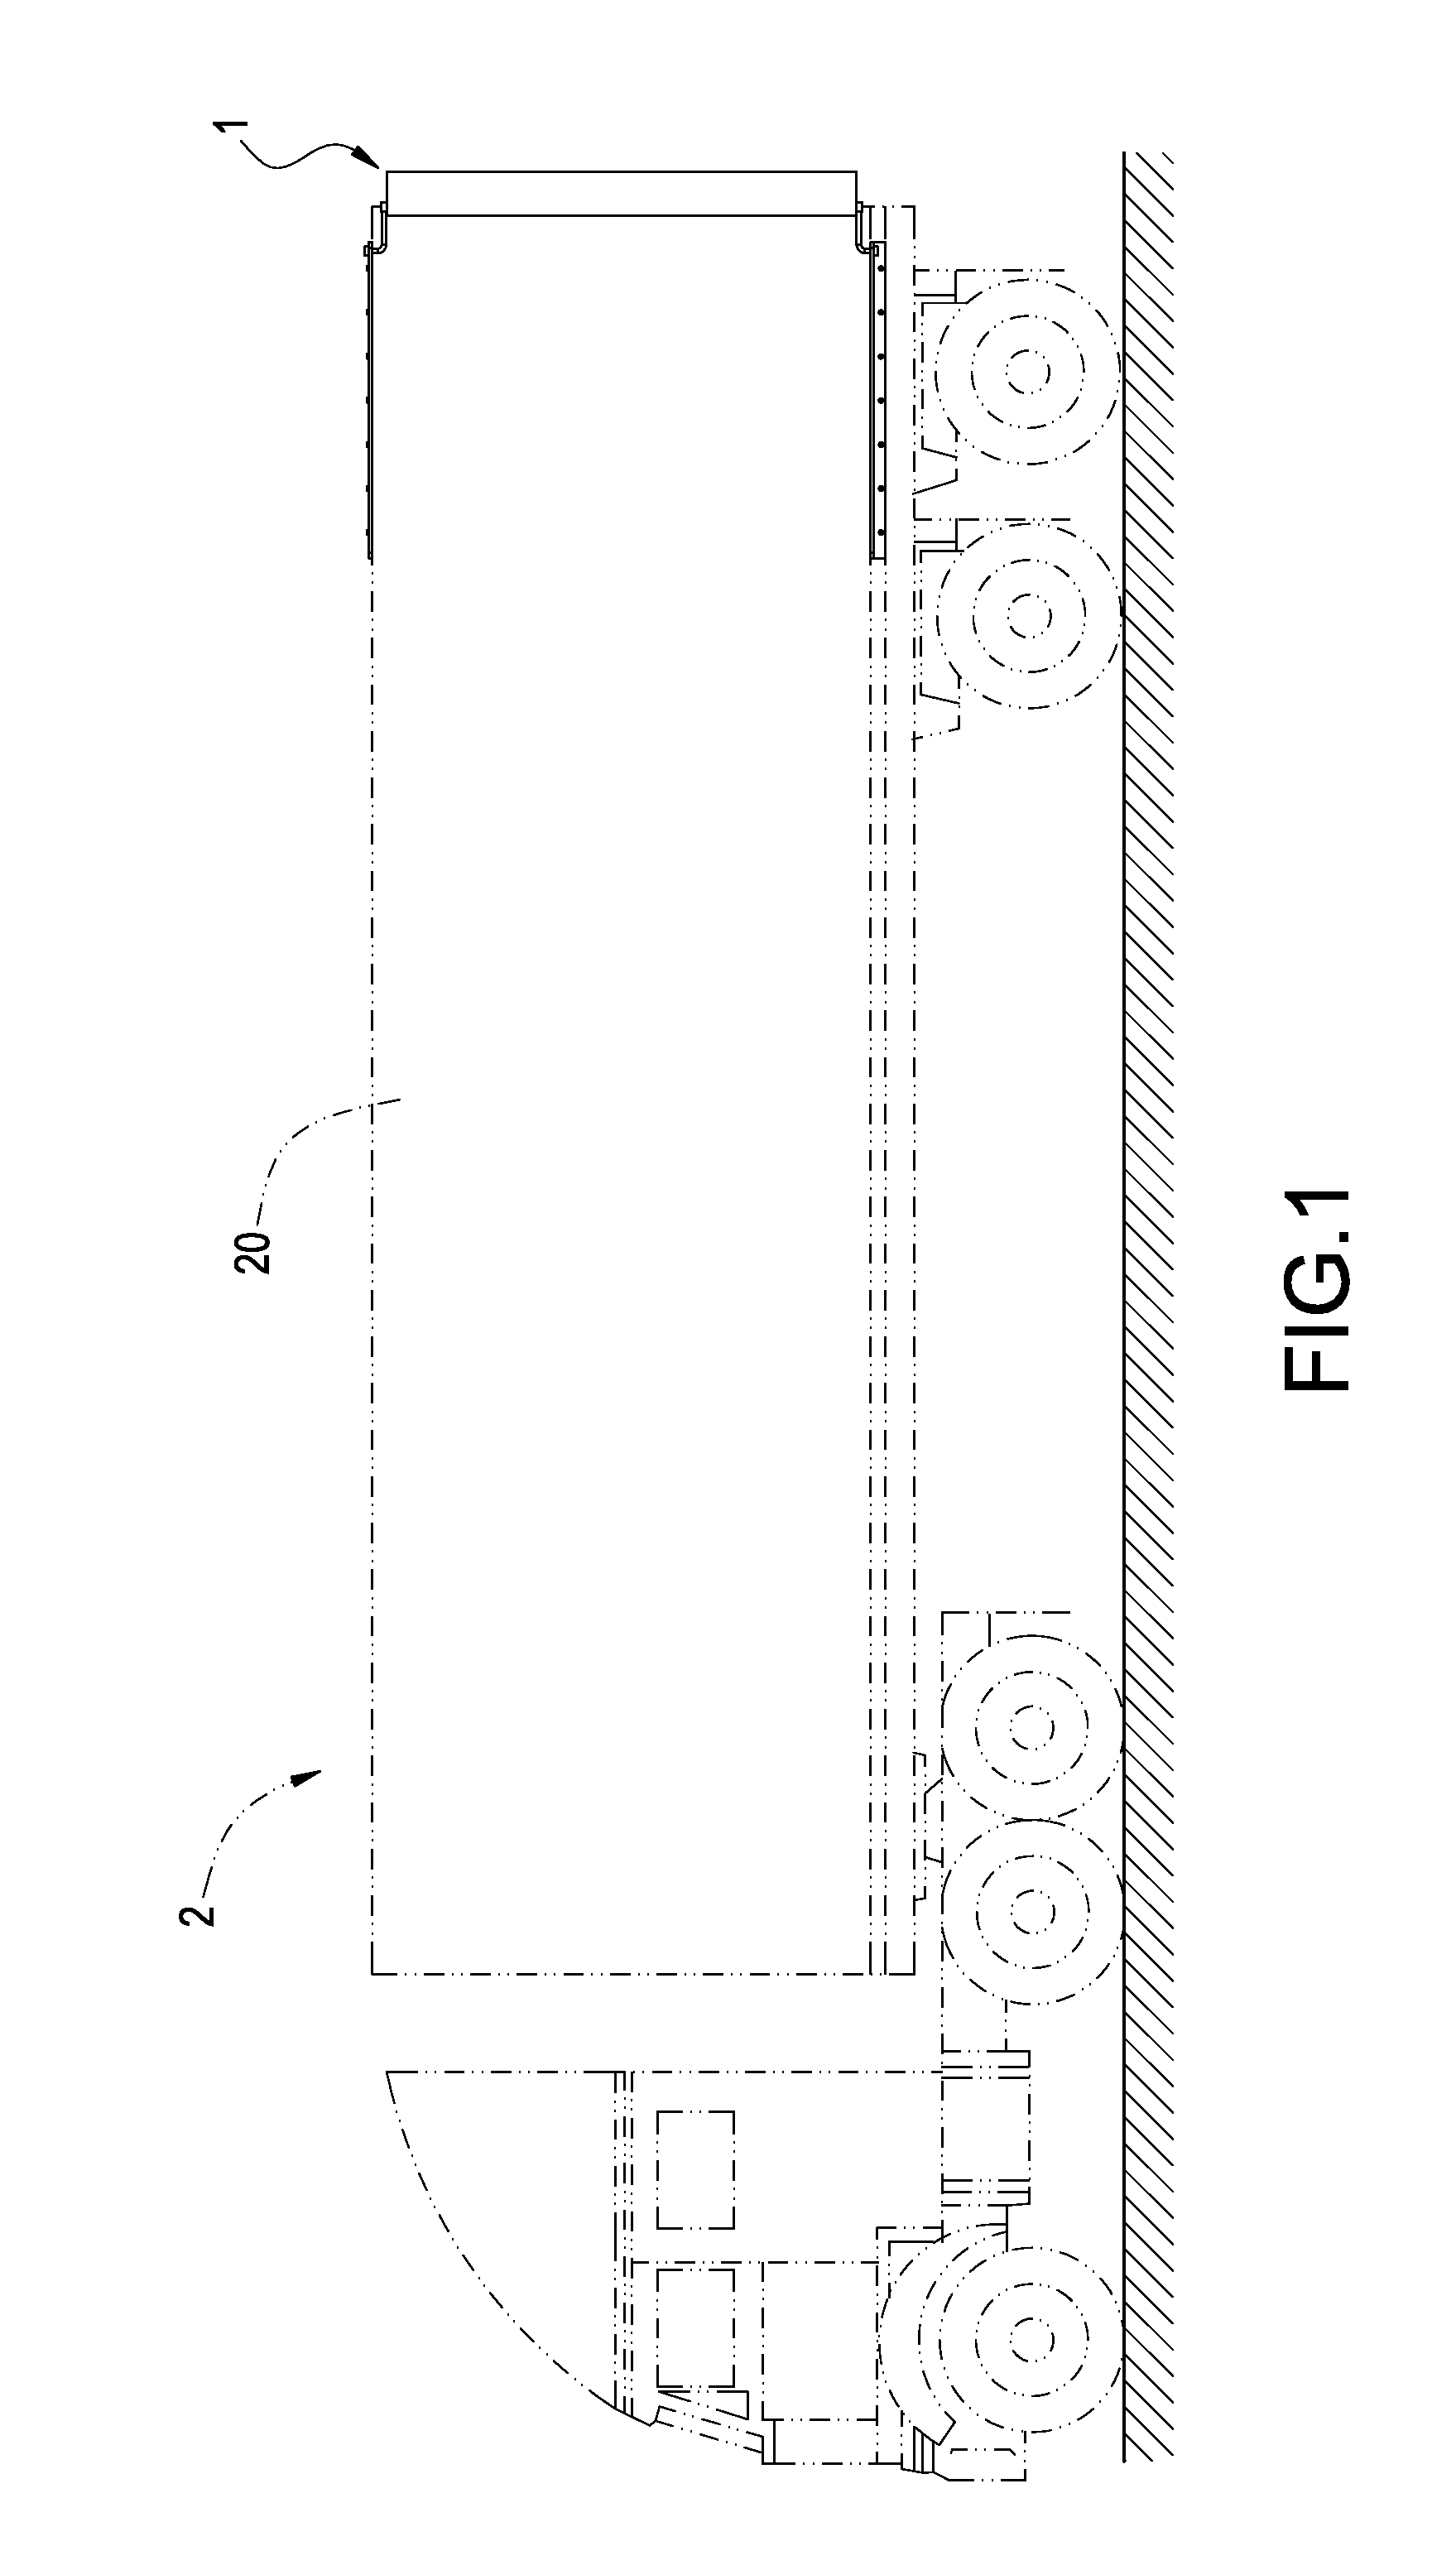 Slippage-typed diversion apparatus for reducing drag of vehicle